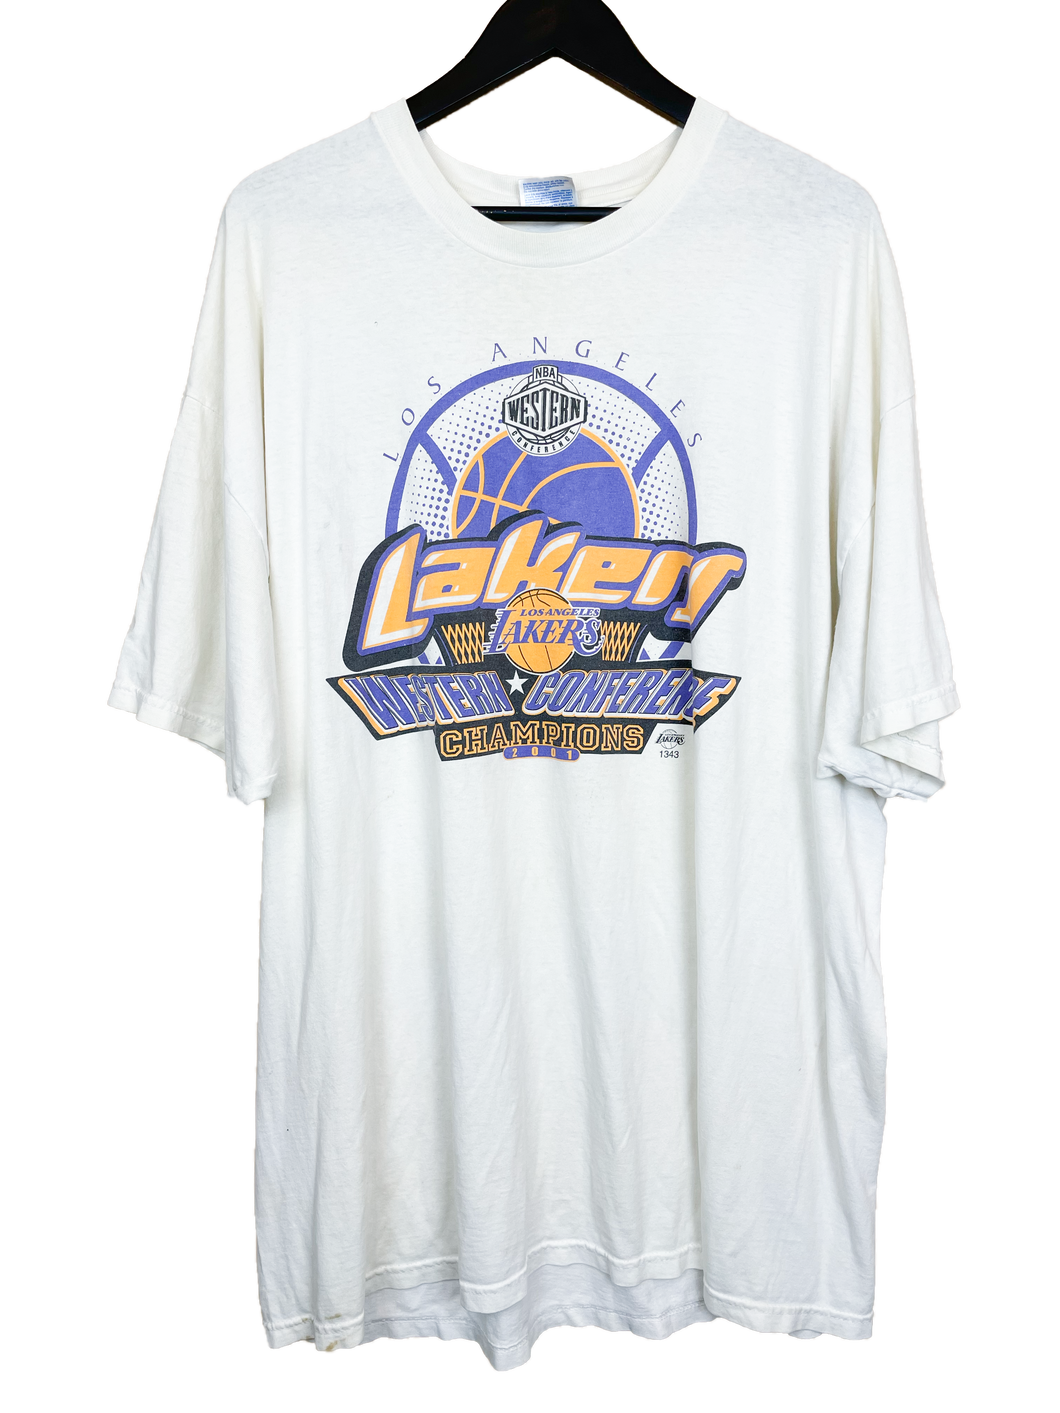 2001 LAKERS WC CHAMPS TEE - XXL